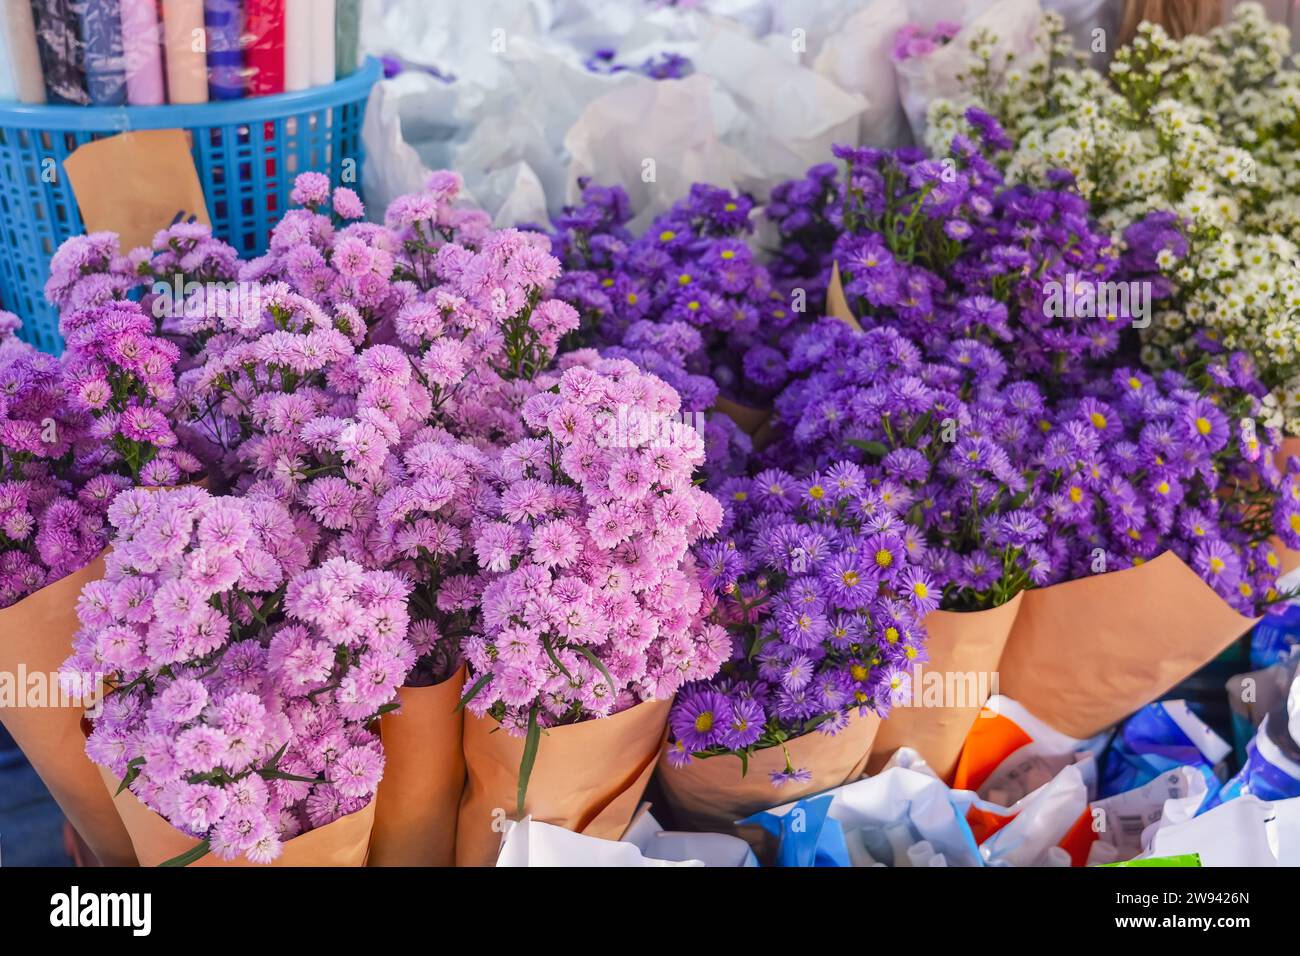 Aster virginiana of purple light tones in a bouquet for sale. Stock Photo